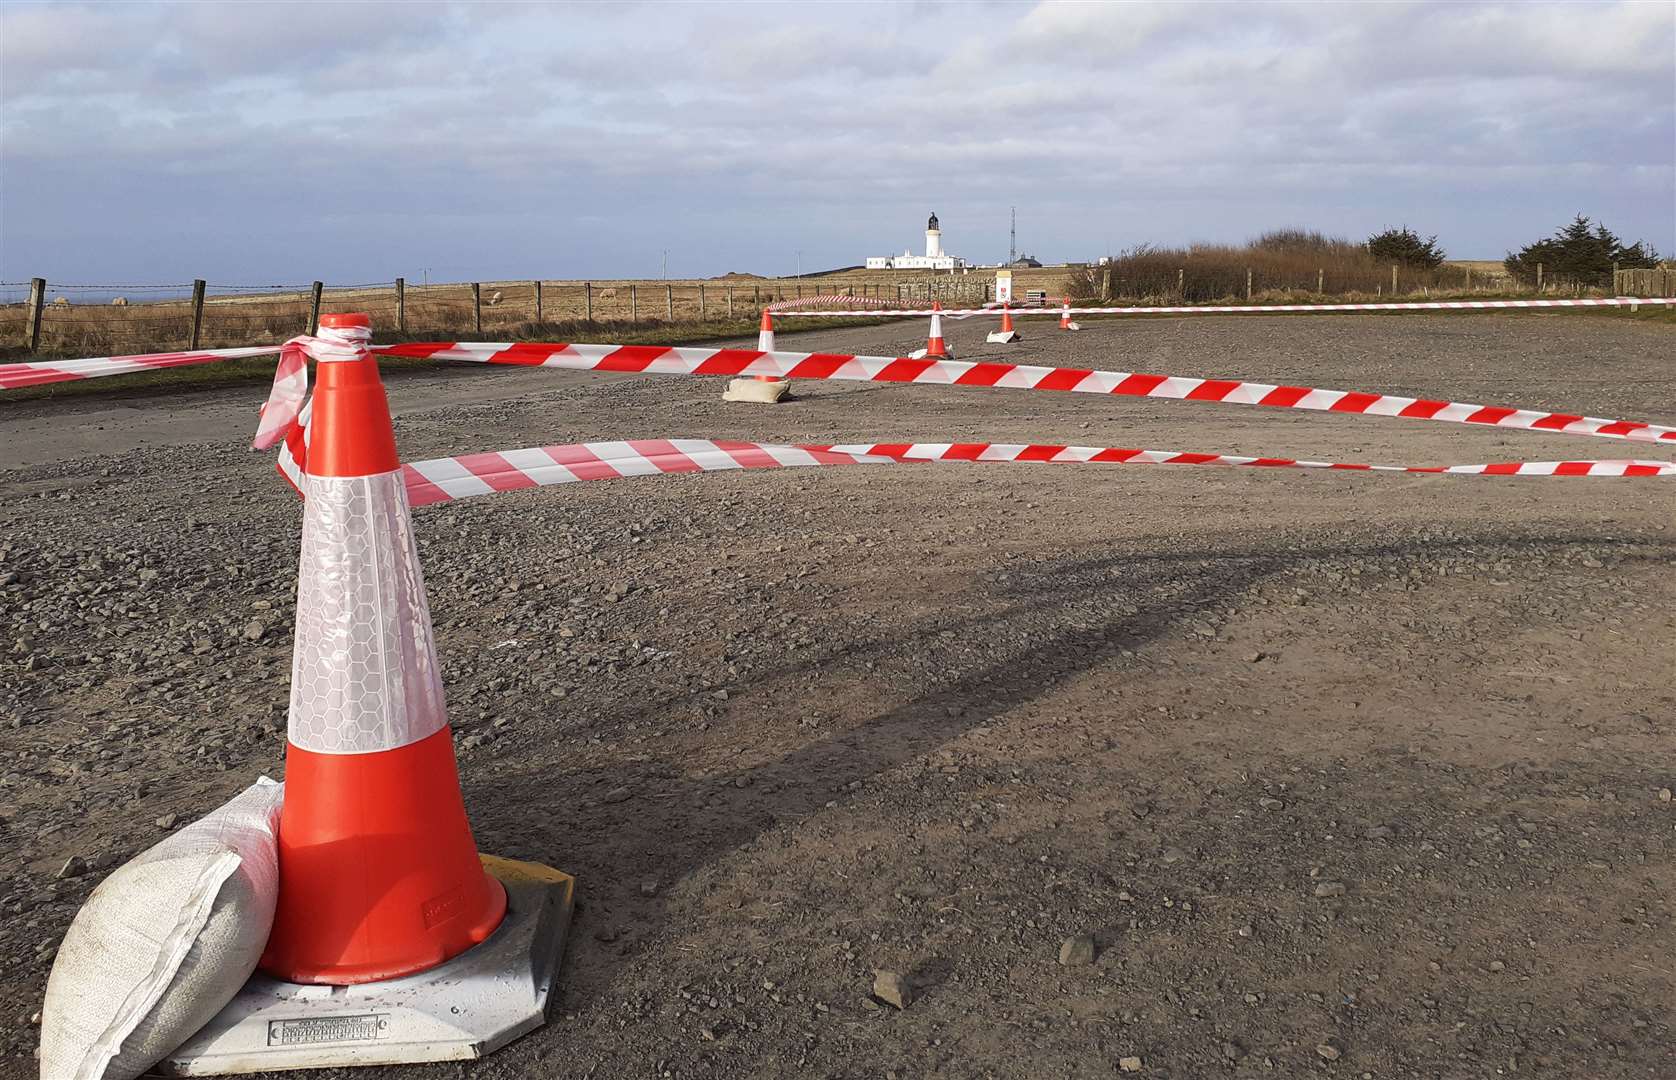 Noss Head, near Wick – one of 15 car parks across the north Highlands that were closed by Highland Council ahead of Easter weekend.